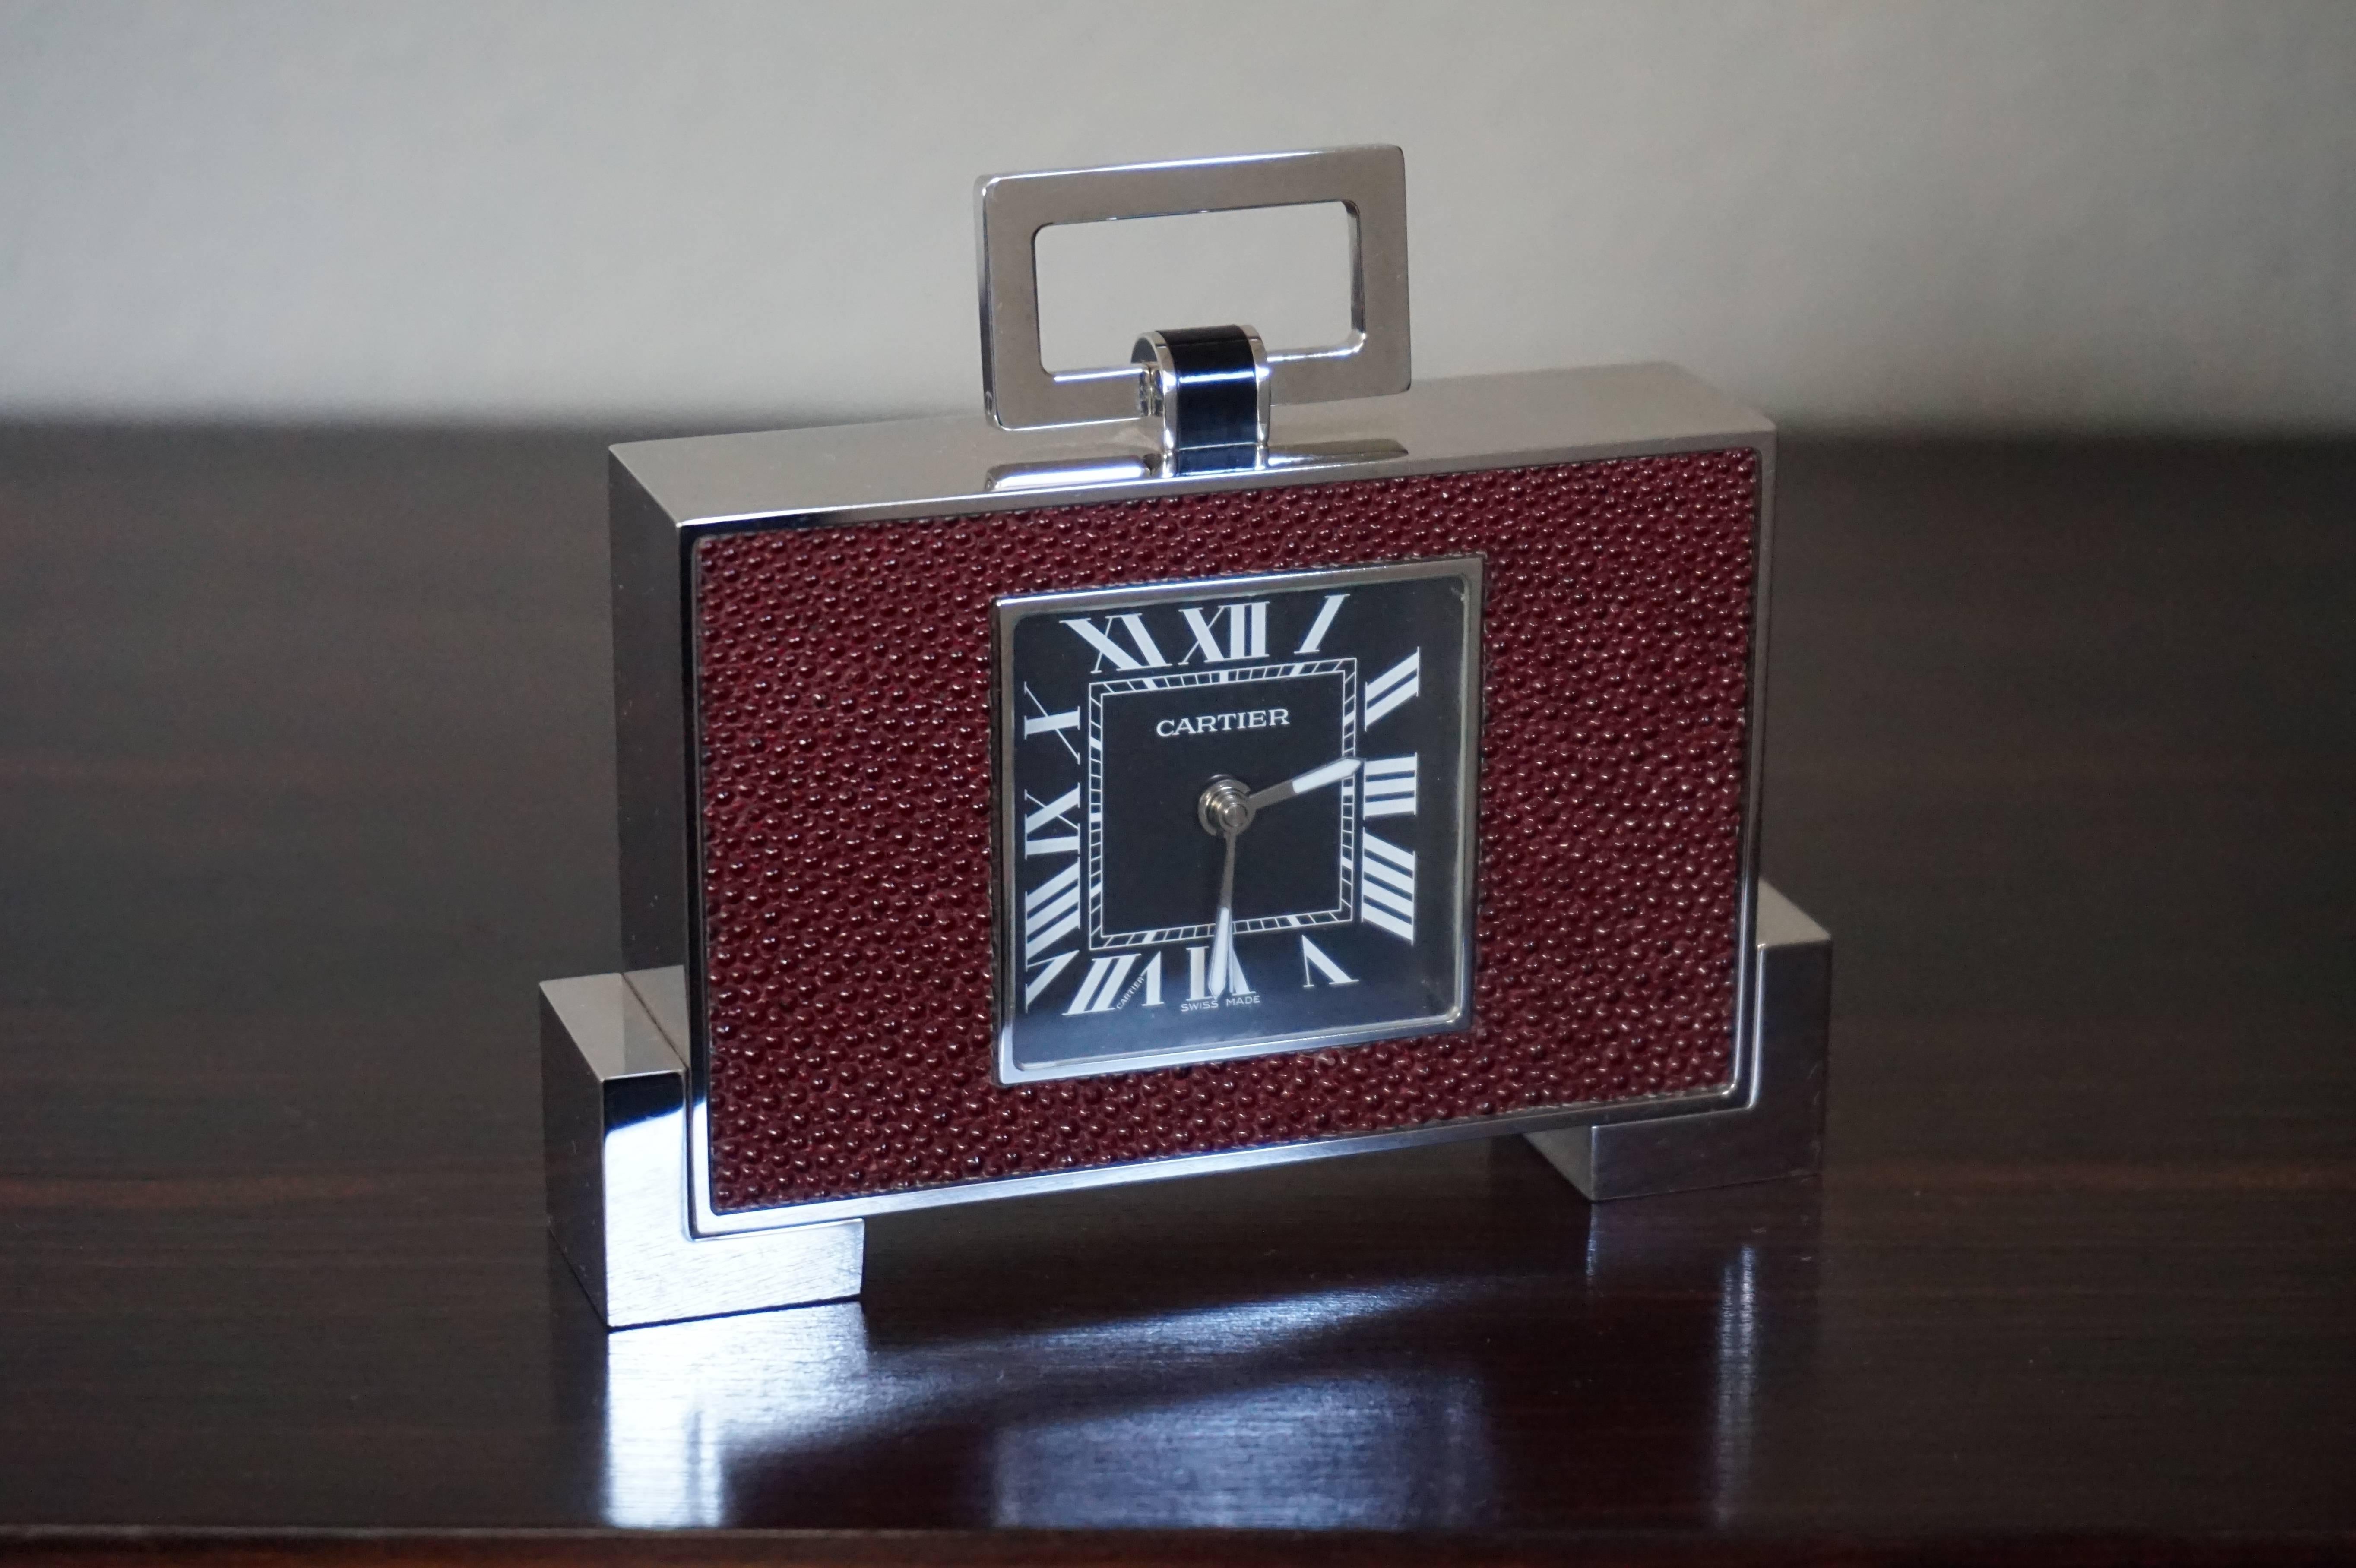 Stunning design and top quality, Swiss made traveling clock by Cartier.

This Art Deco style traveling clock is by one the world's most famous and best quality makers. The design and the look and feel just make you happy and when you feel the